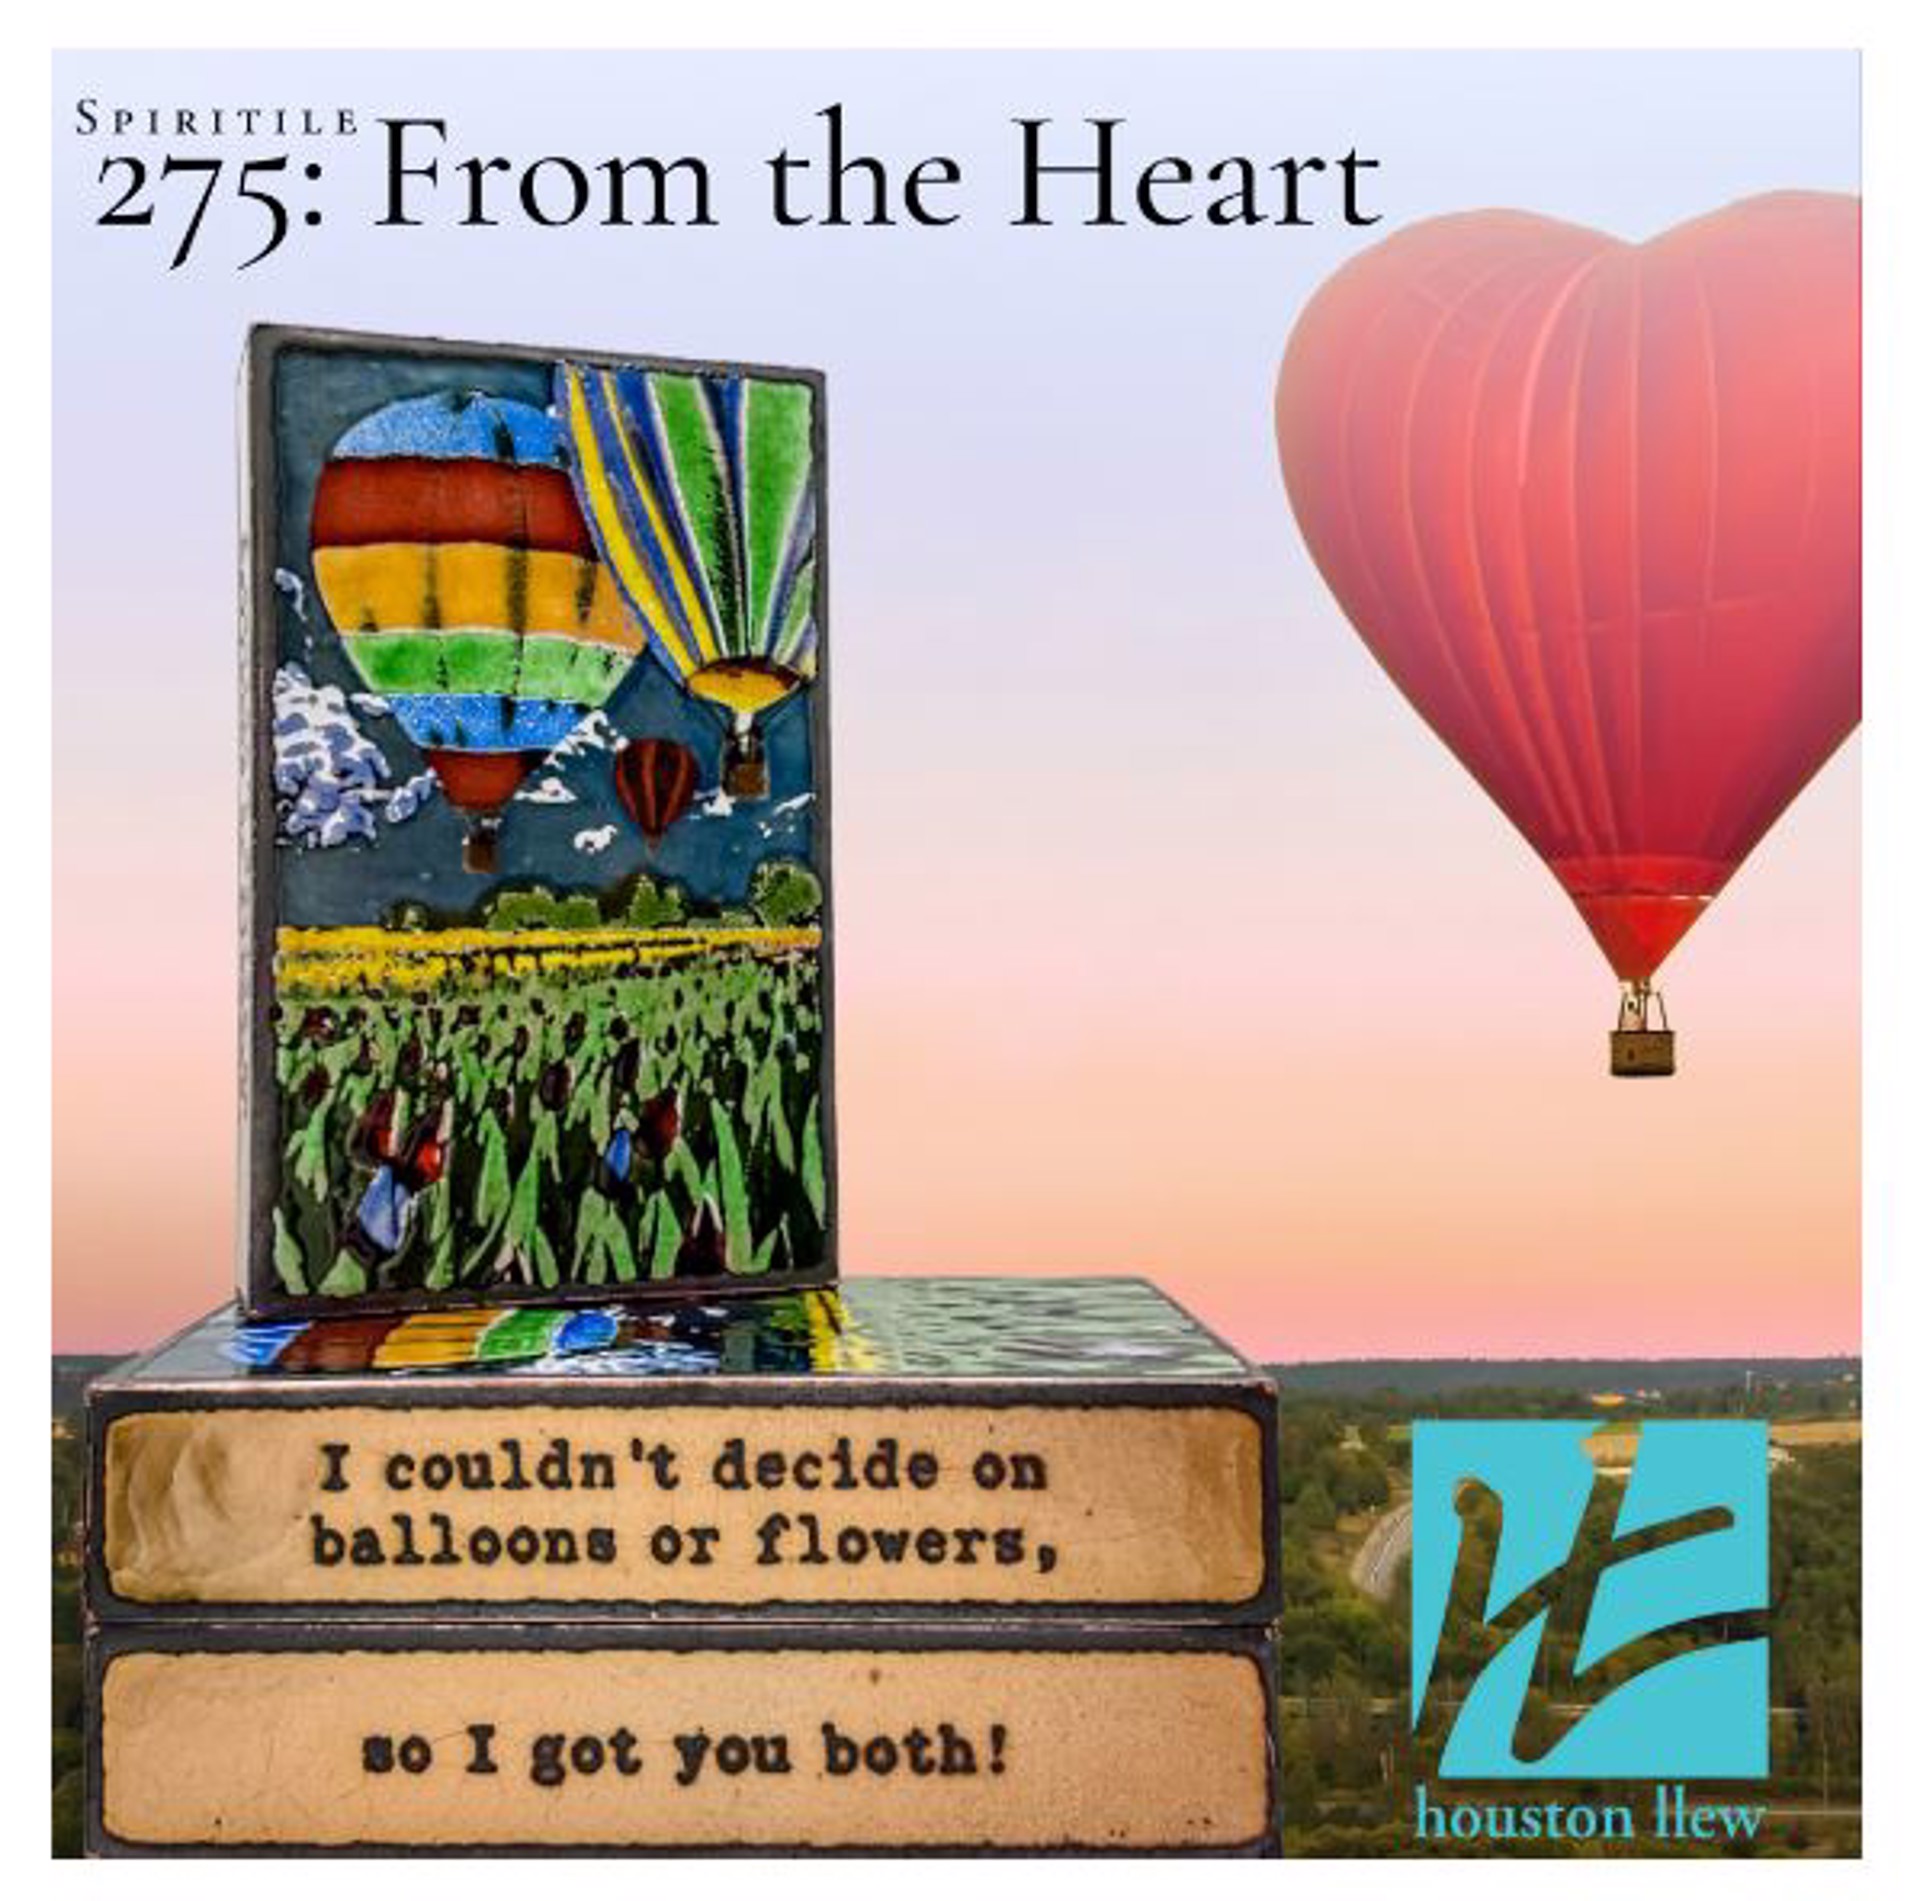 From The Heart 275 by Houston Llew